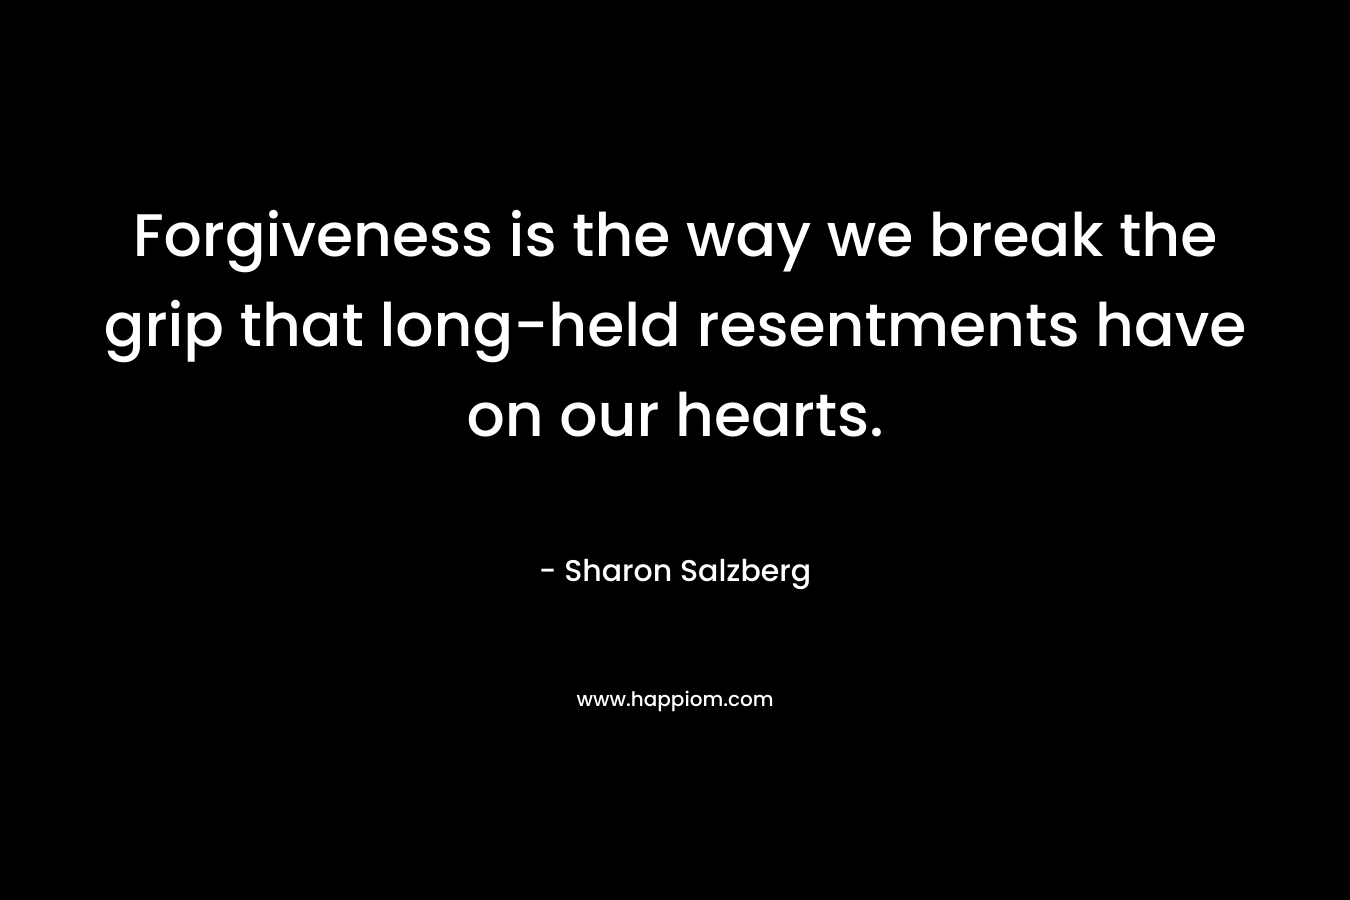 Forgiveness is the way we break the grip that long-held resentments have on our hearts.